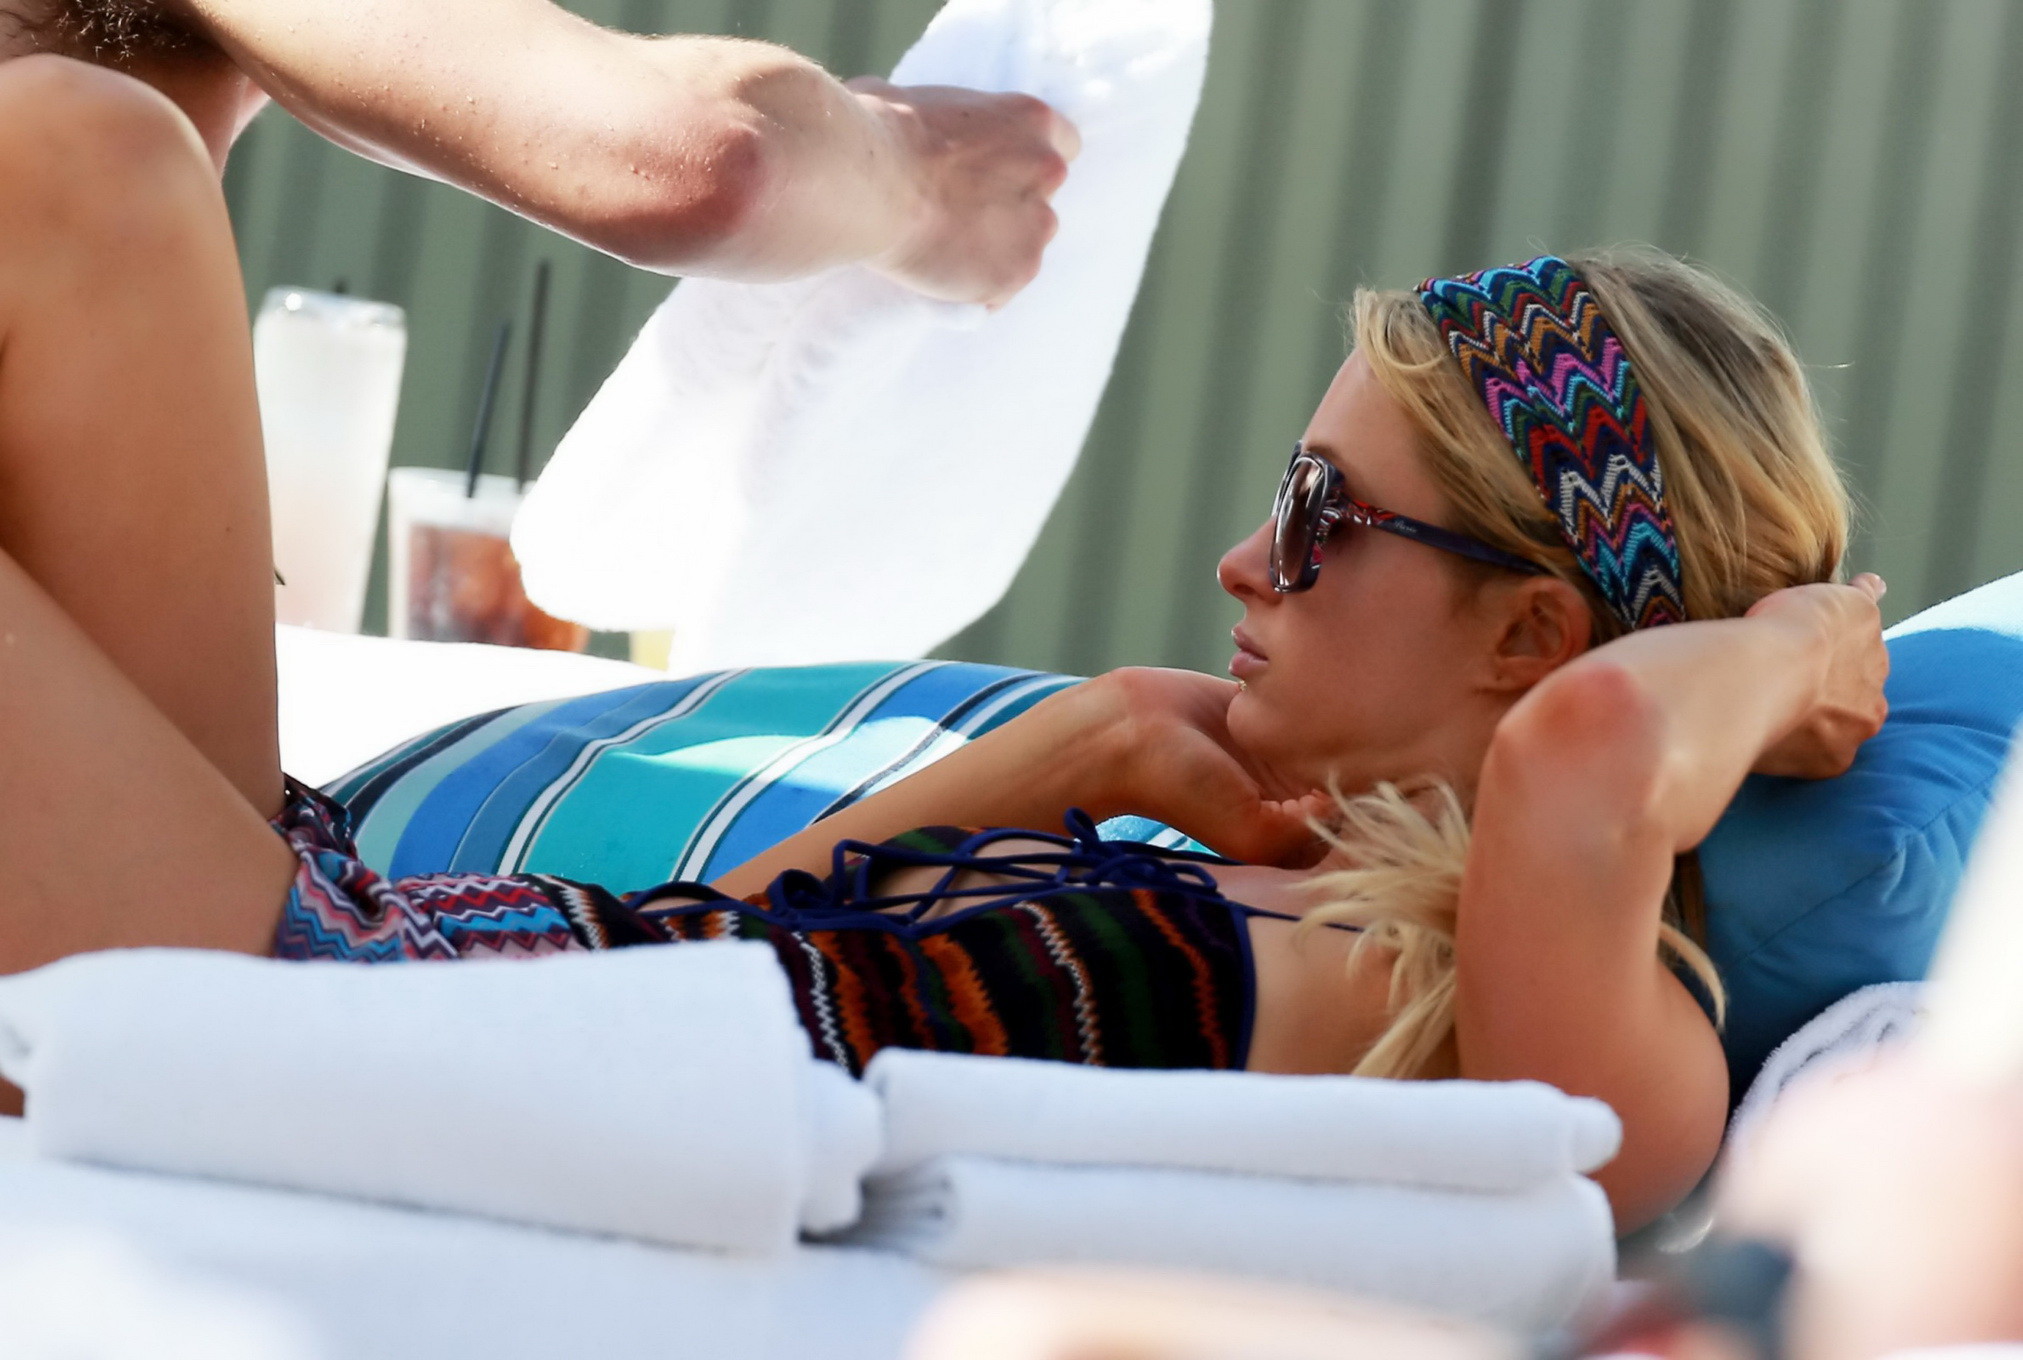 Paris Hilton showing off her hot body in skimpy multi colored swimsuit at a pool #75246553